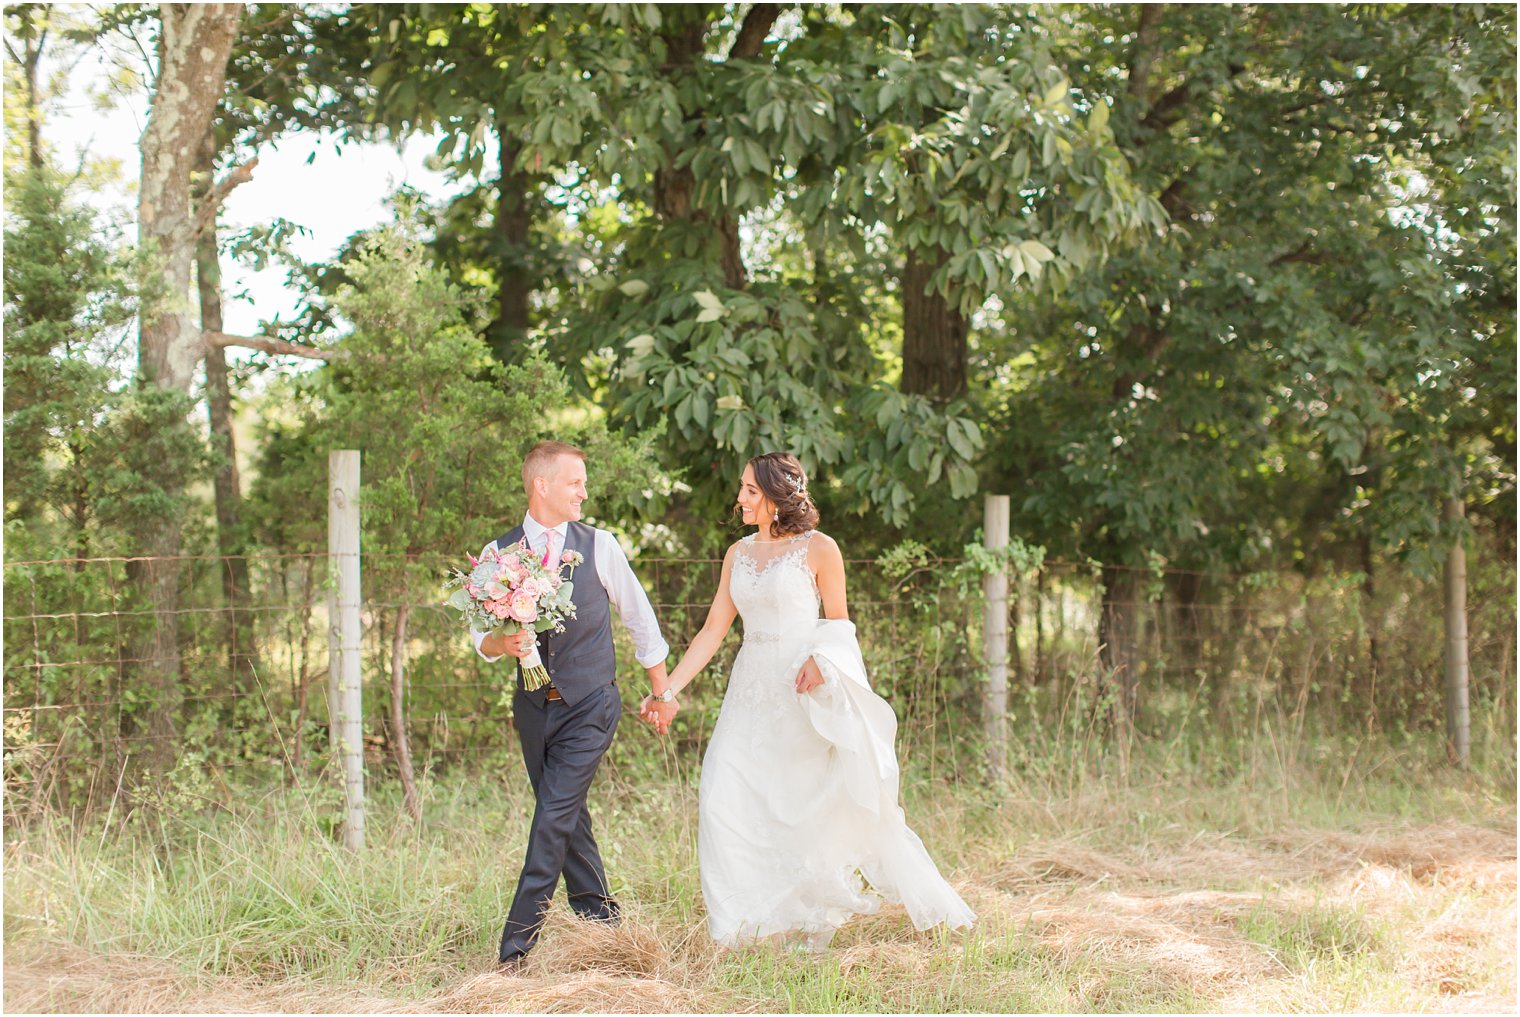 Walking photo of bride and groom at Stone Rows Farm